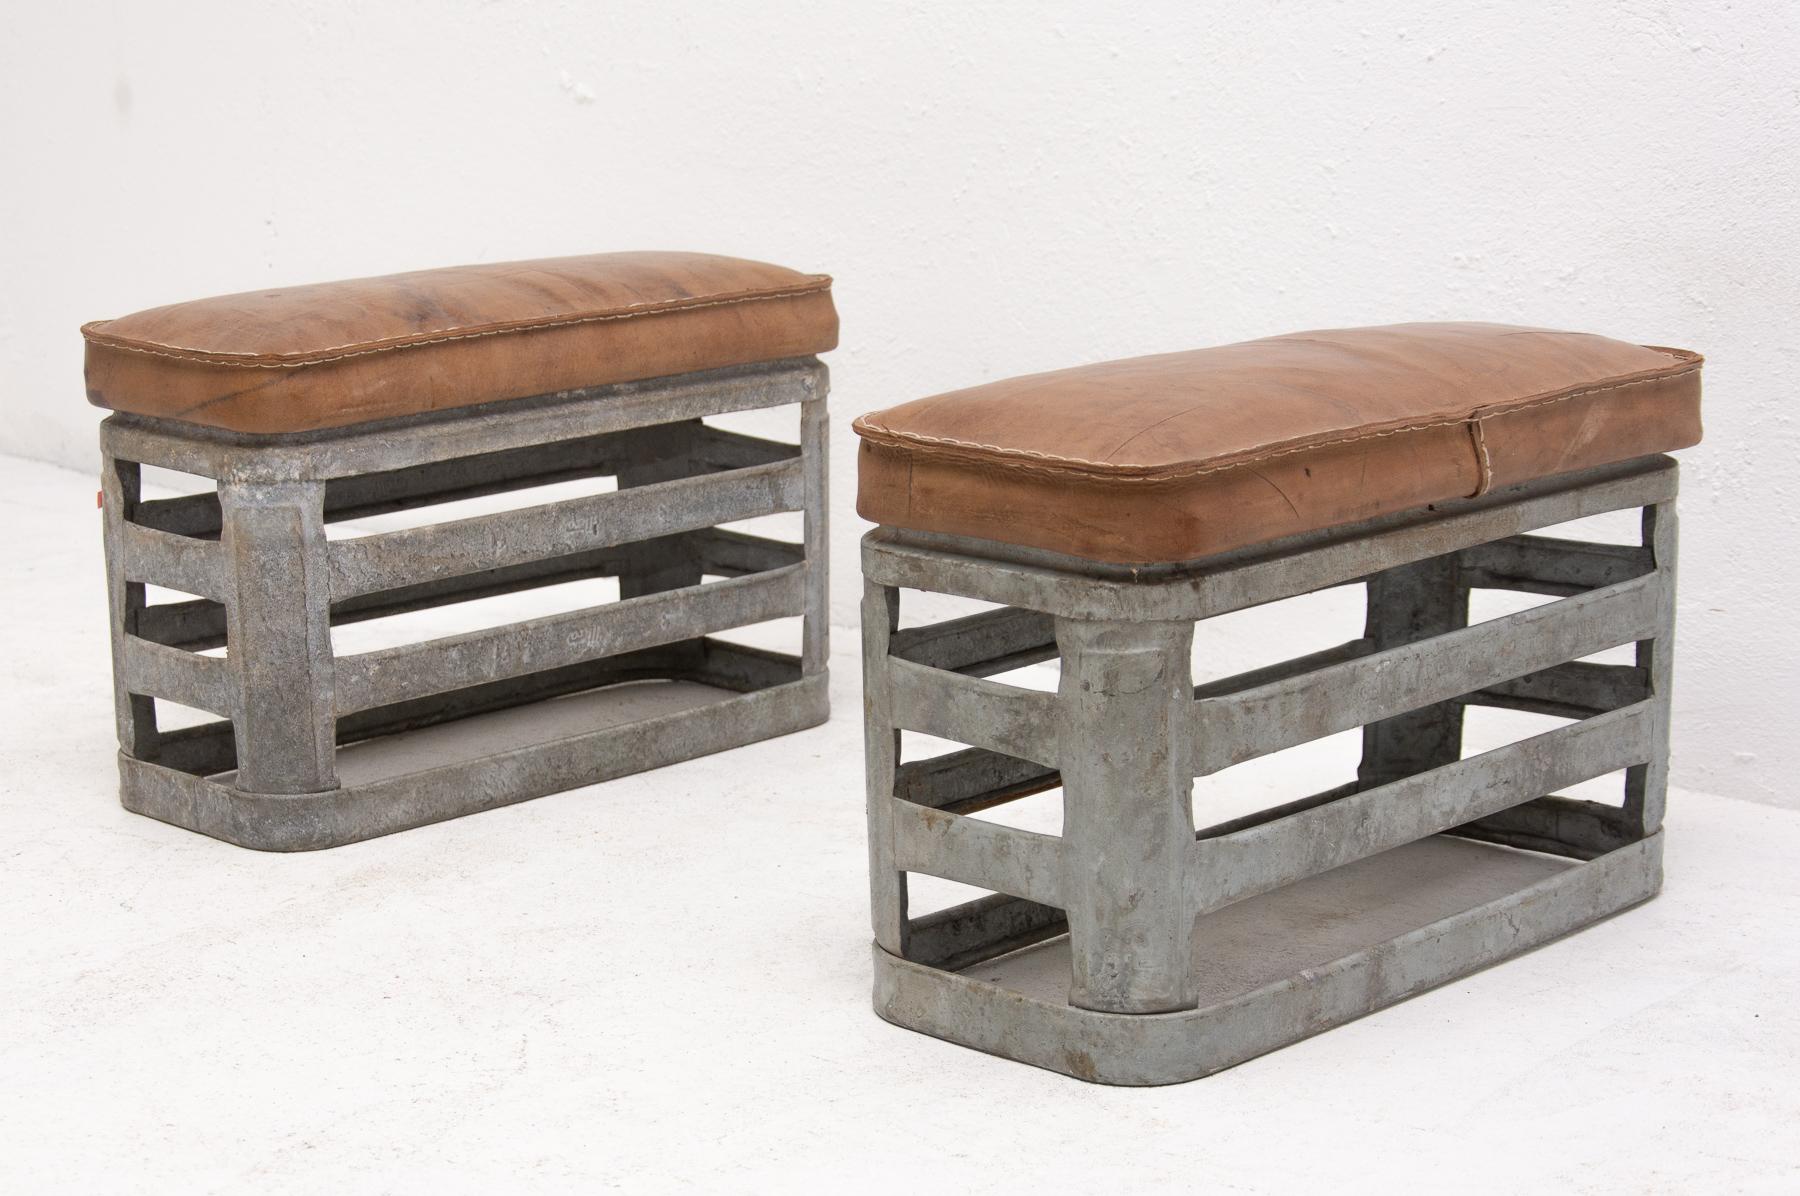 Pair of Czechoslovak Vintage industrial stools, made in the 1960s. It features an unconventional design. It features a metal structure with leather cushion on the top. In good Vintage condition, bears signs of age and using with a nice patina. Price